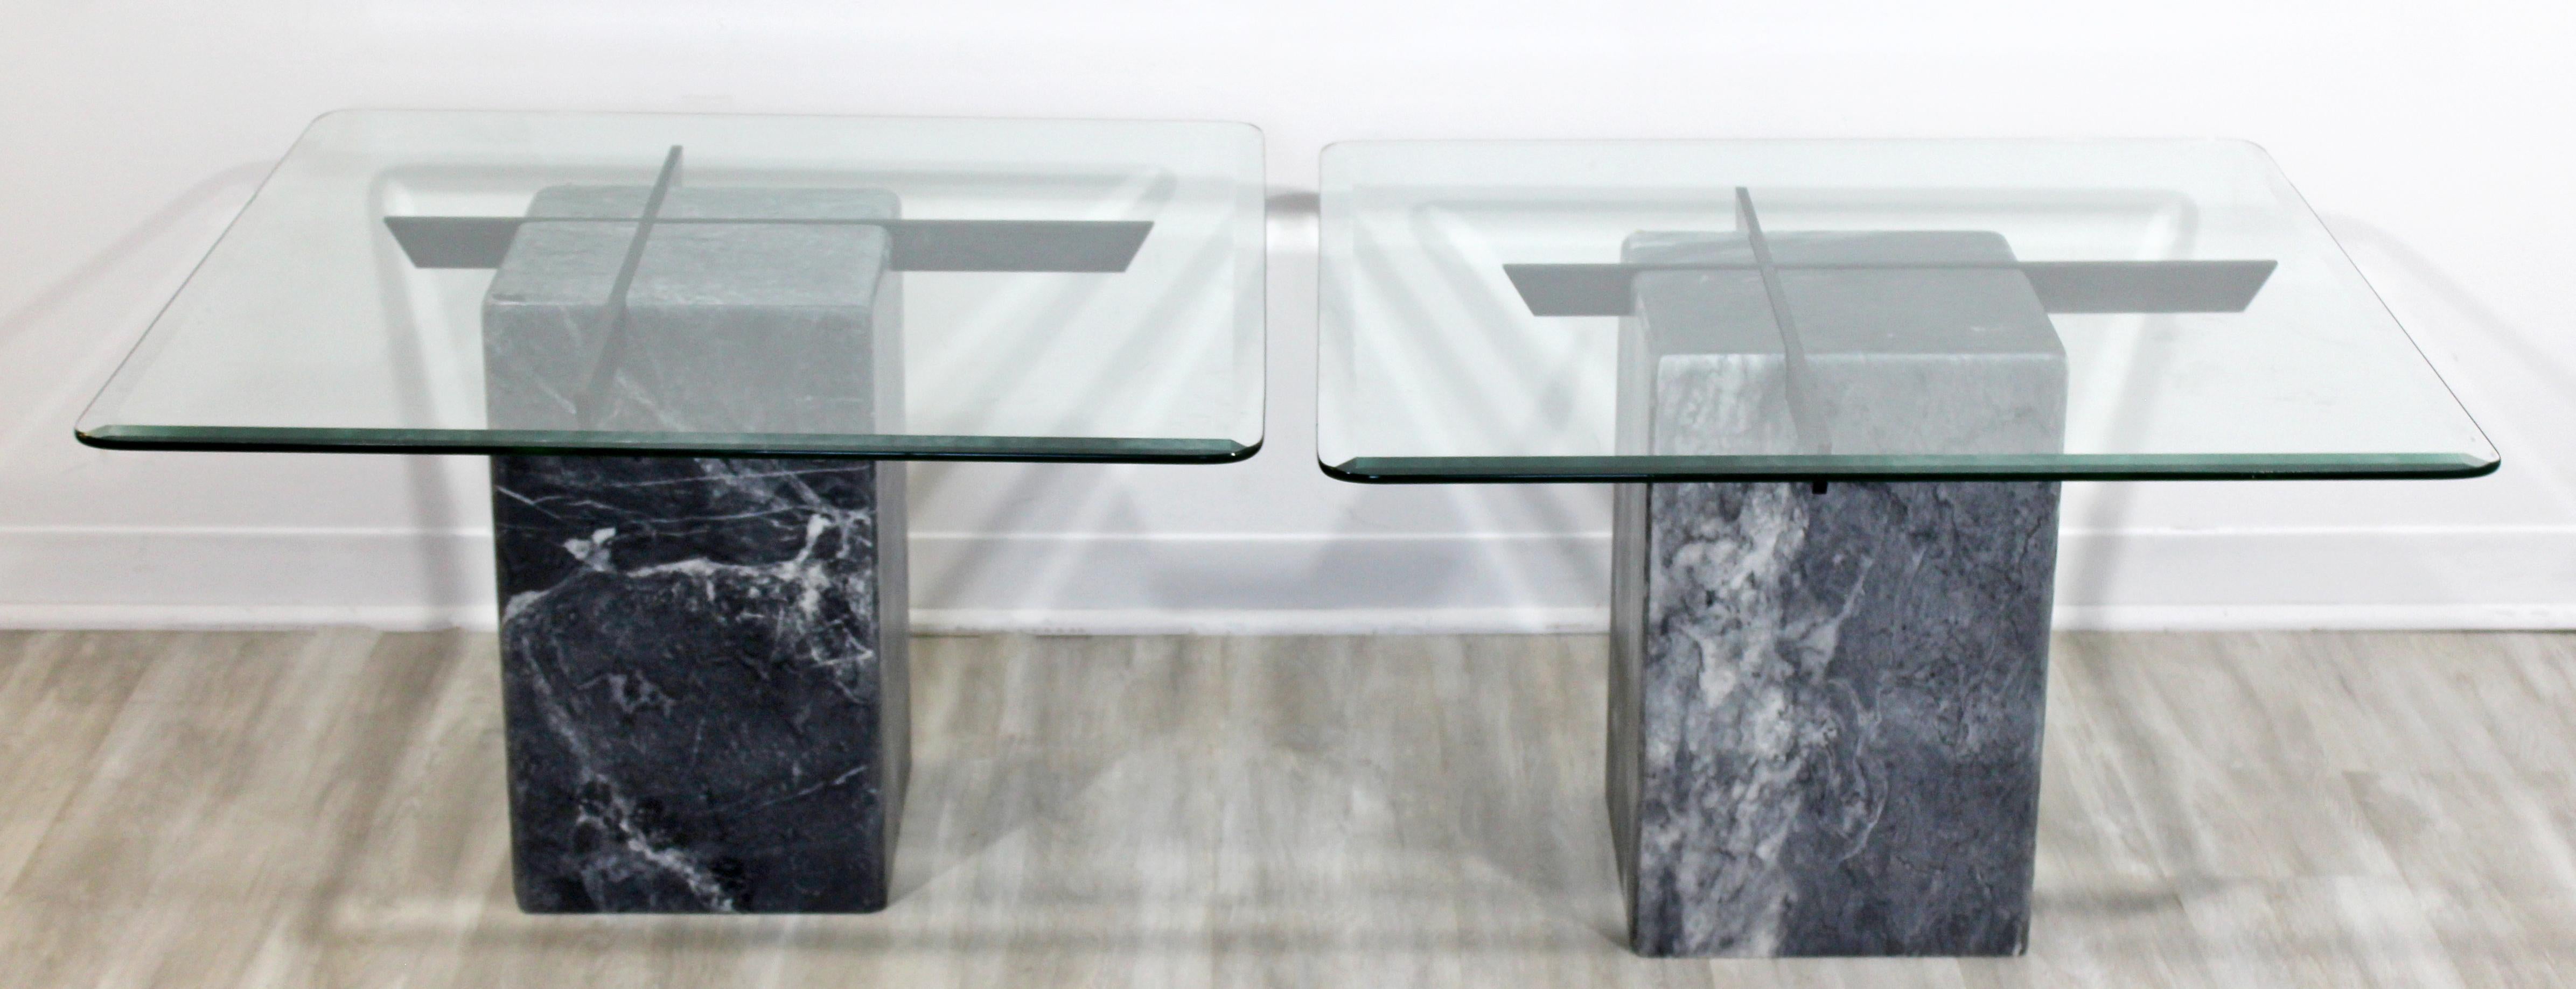 For your consideration is a pair of incredible, glass topped, marble side or end tables, made in Denmark, by Bendixen Designs, circa 1980s. In the style of Artedi. In excellent vintage condition. The dimensions are 31.5